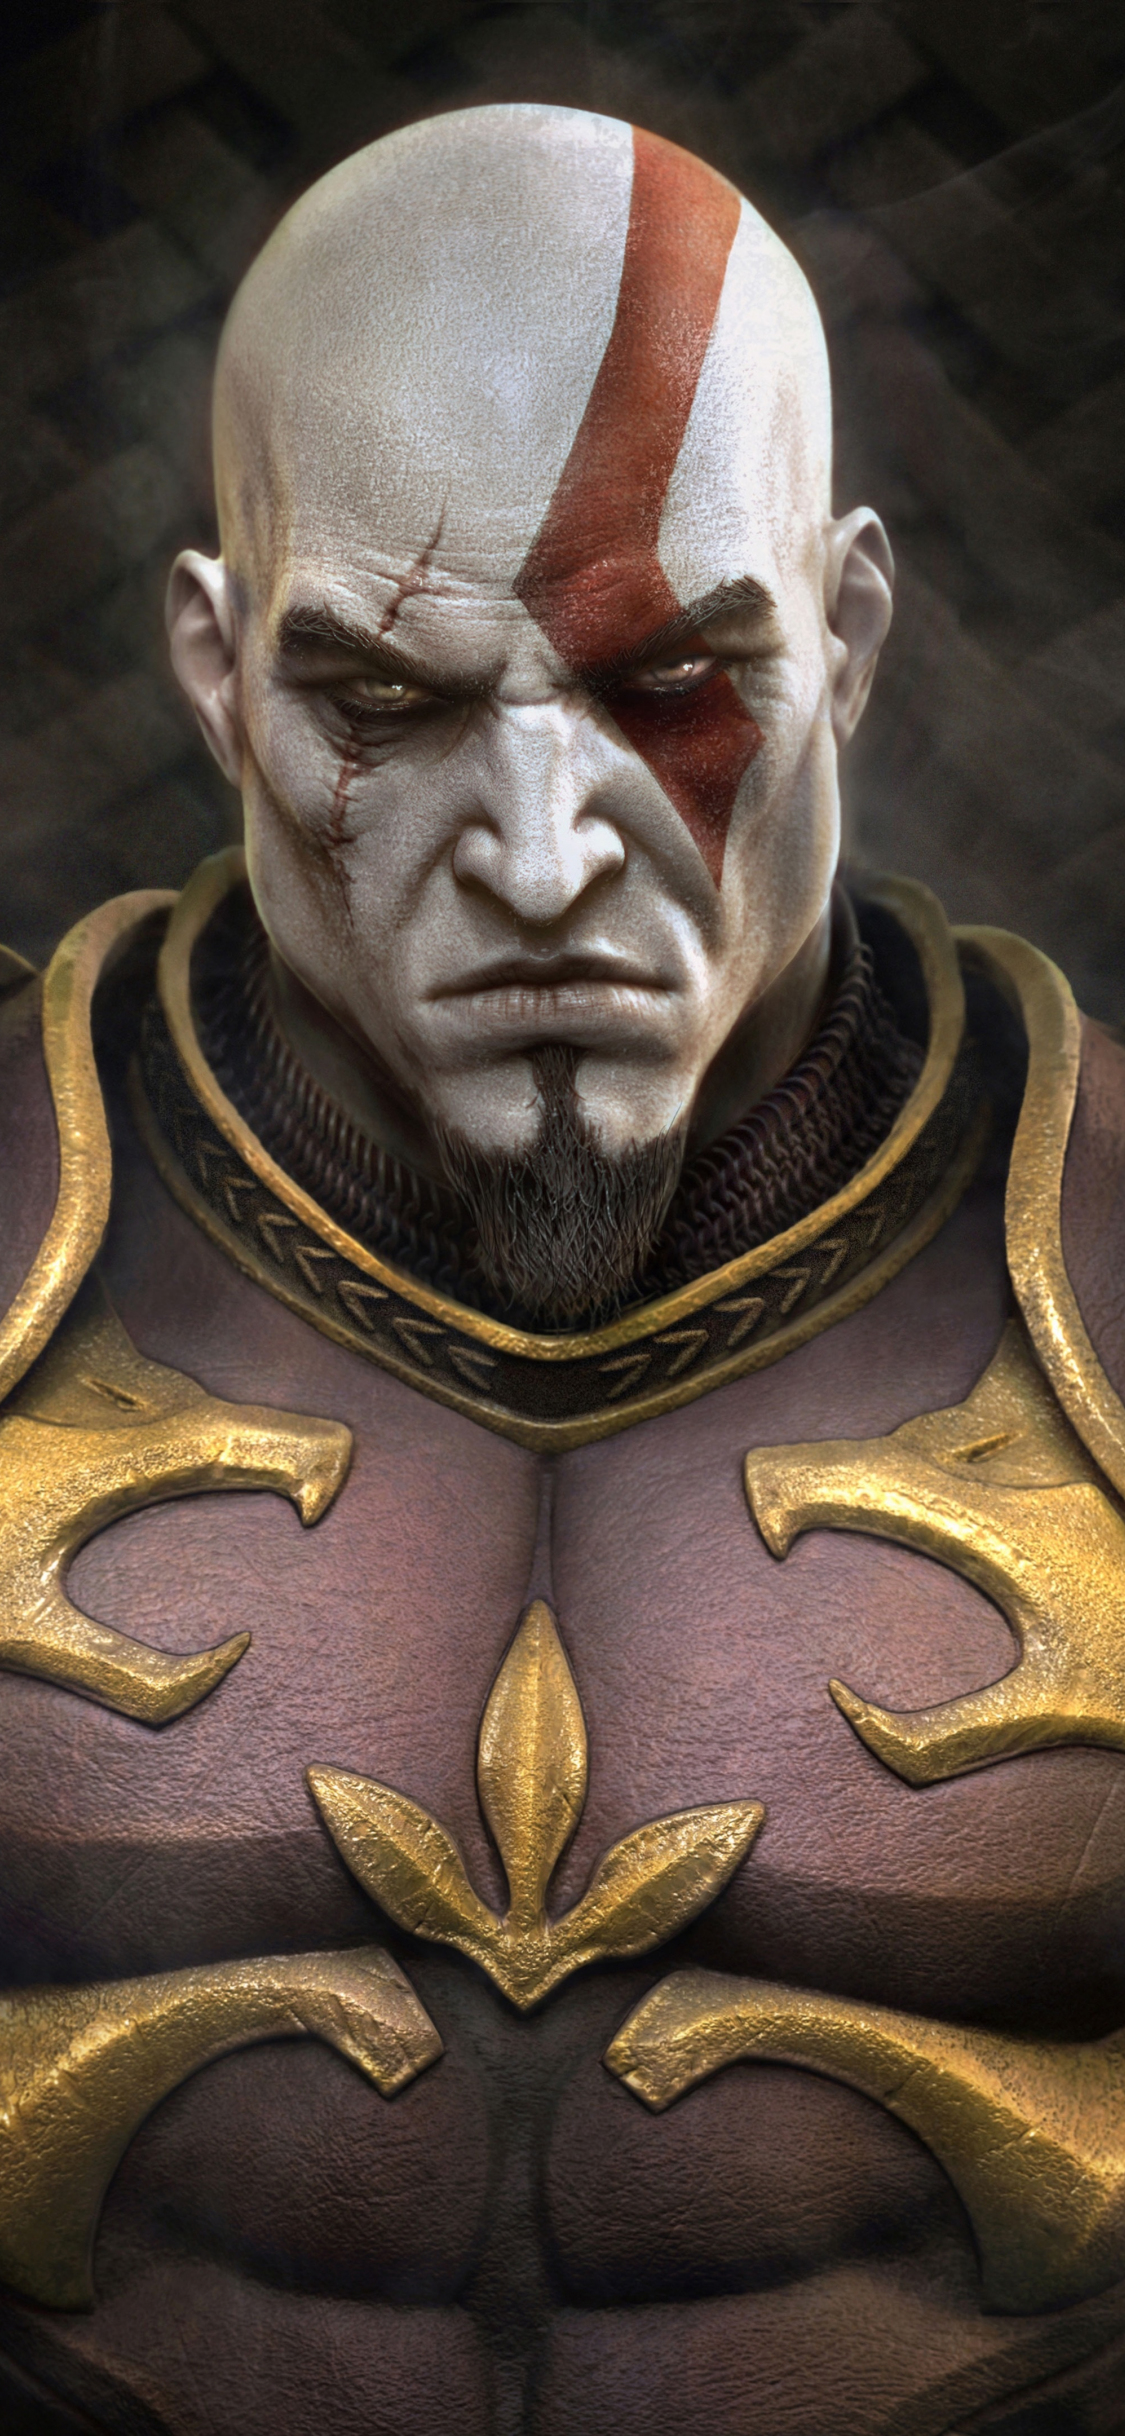 Download wallpaper 840x1336 god of war ragnarok kratos with hammer and  sword 2023 iphone 5 iphone 5s iphone 5c ipod touch 840x1336 hd  background 29069